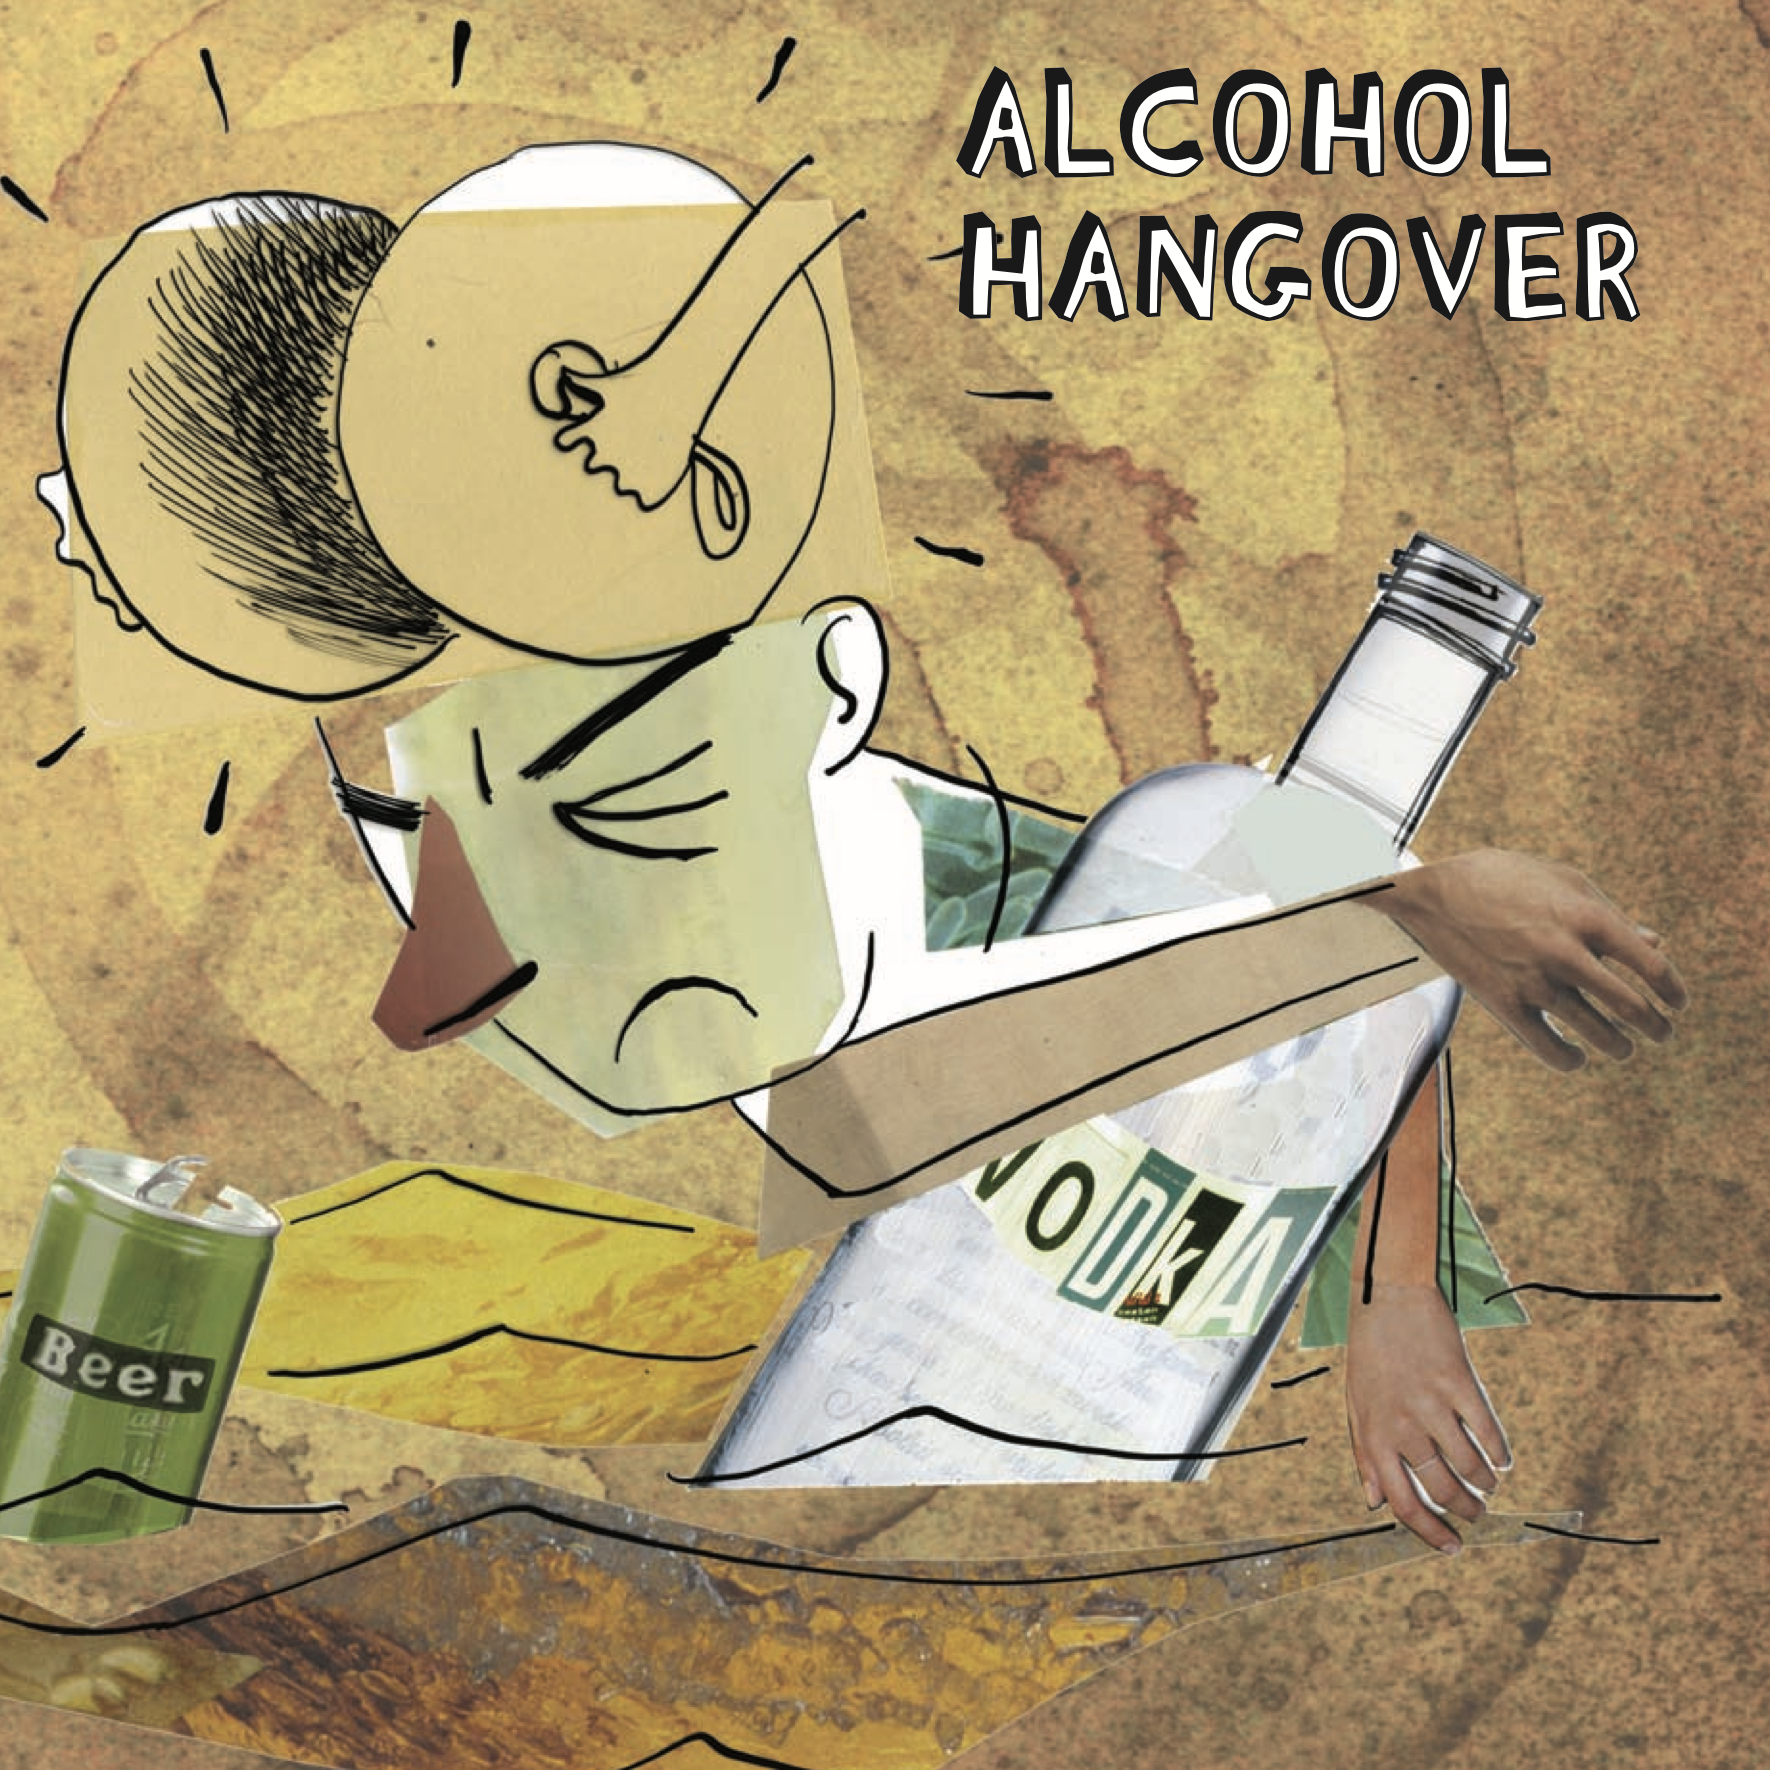 Alcohol hangover (young people version)